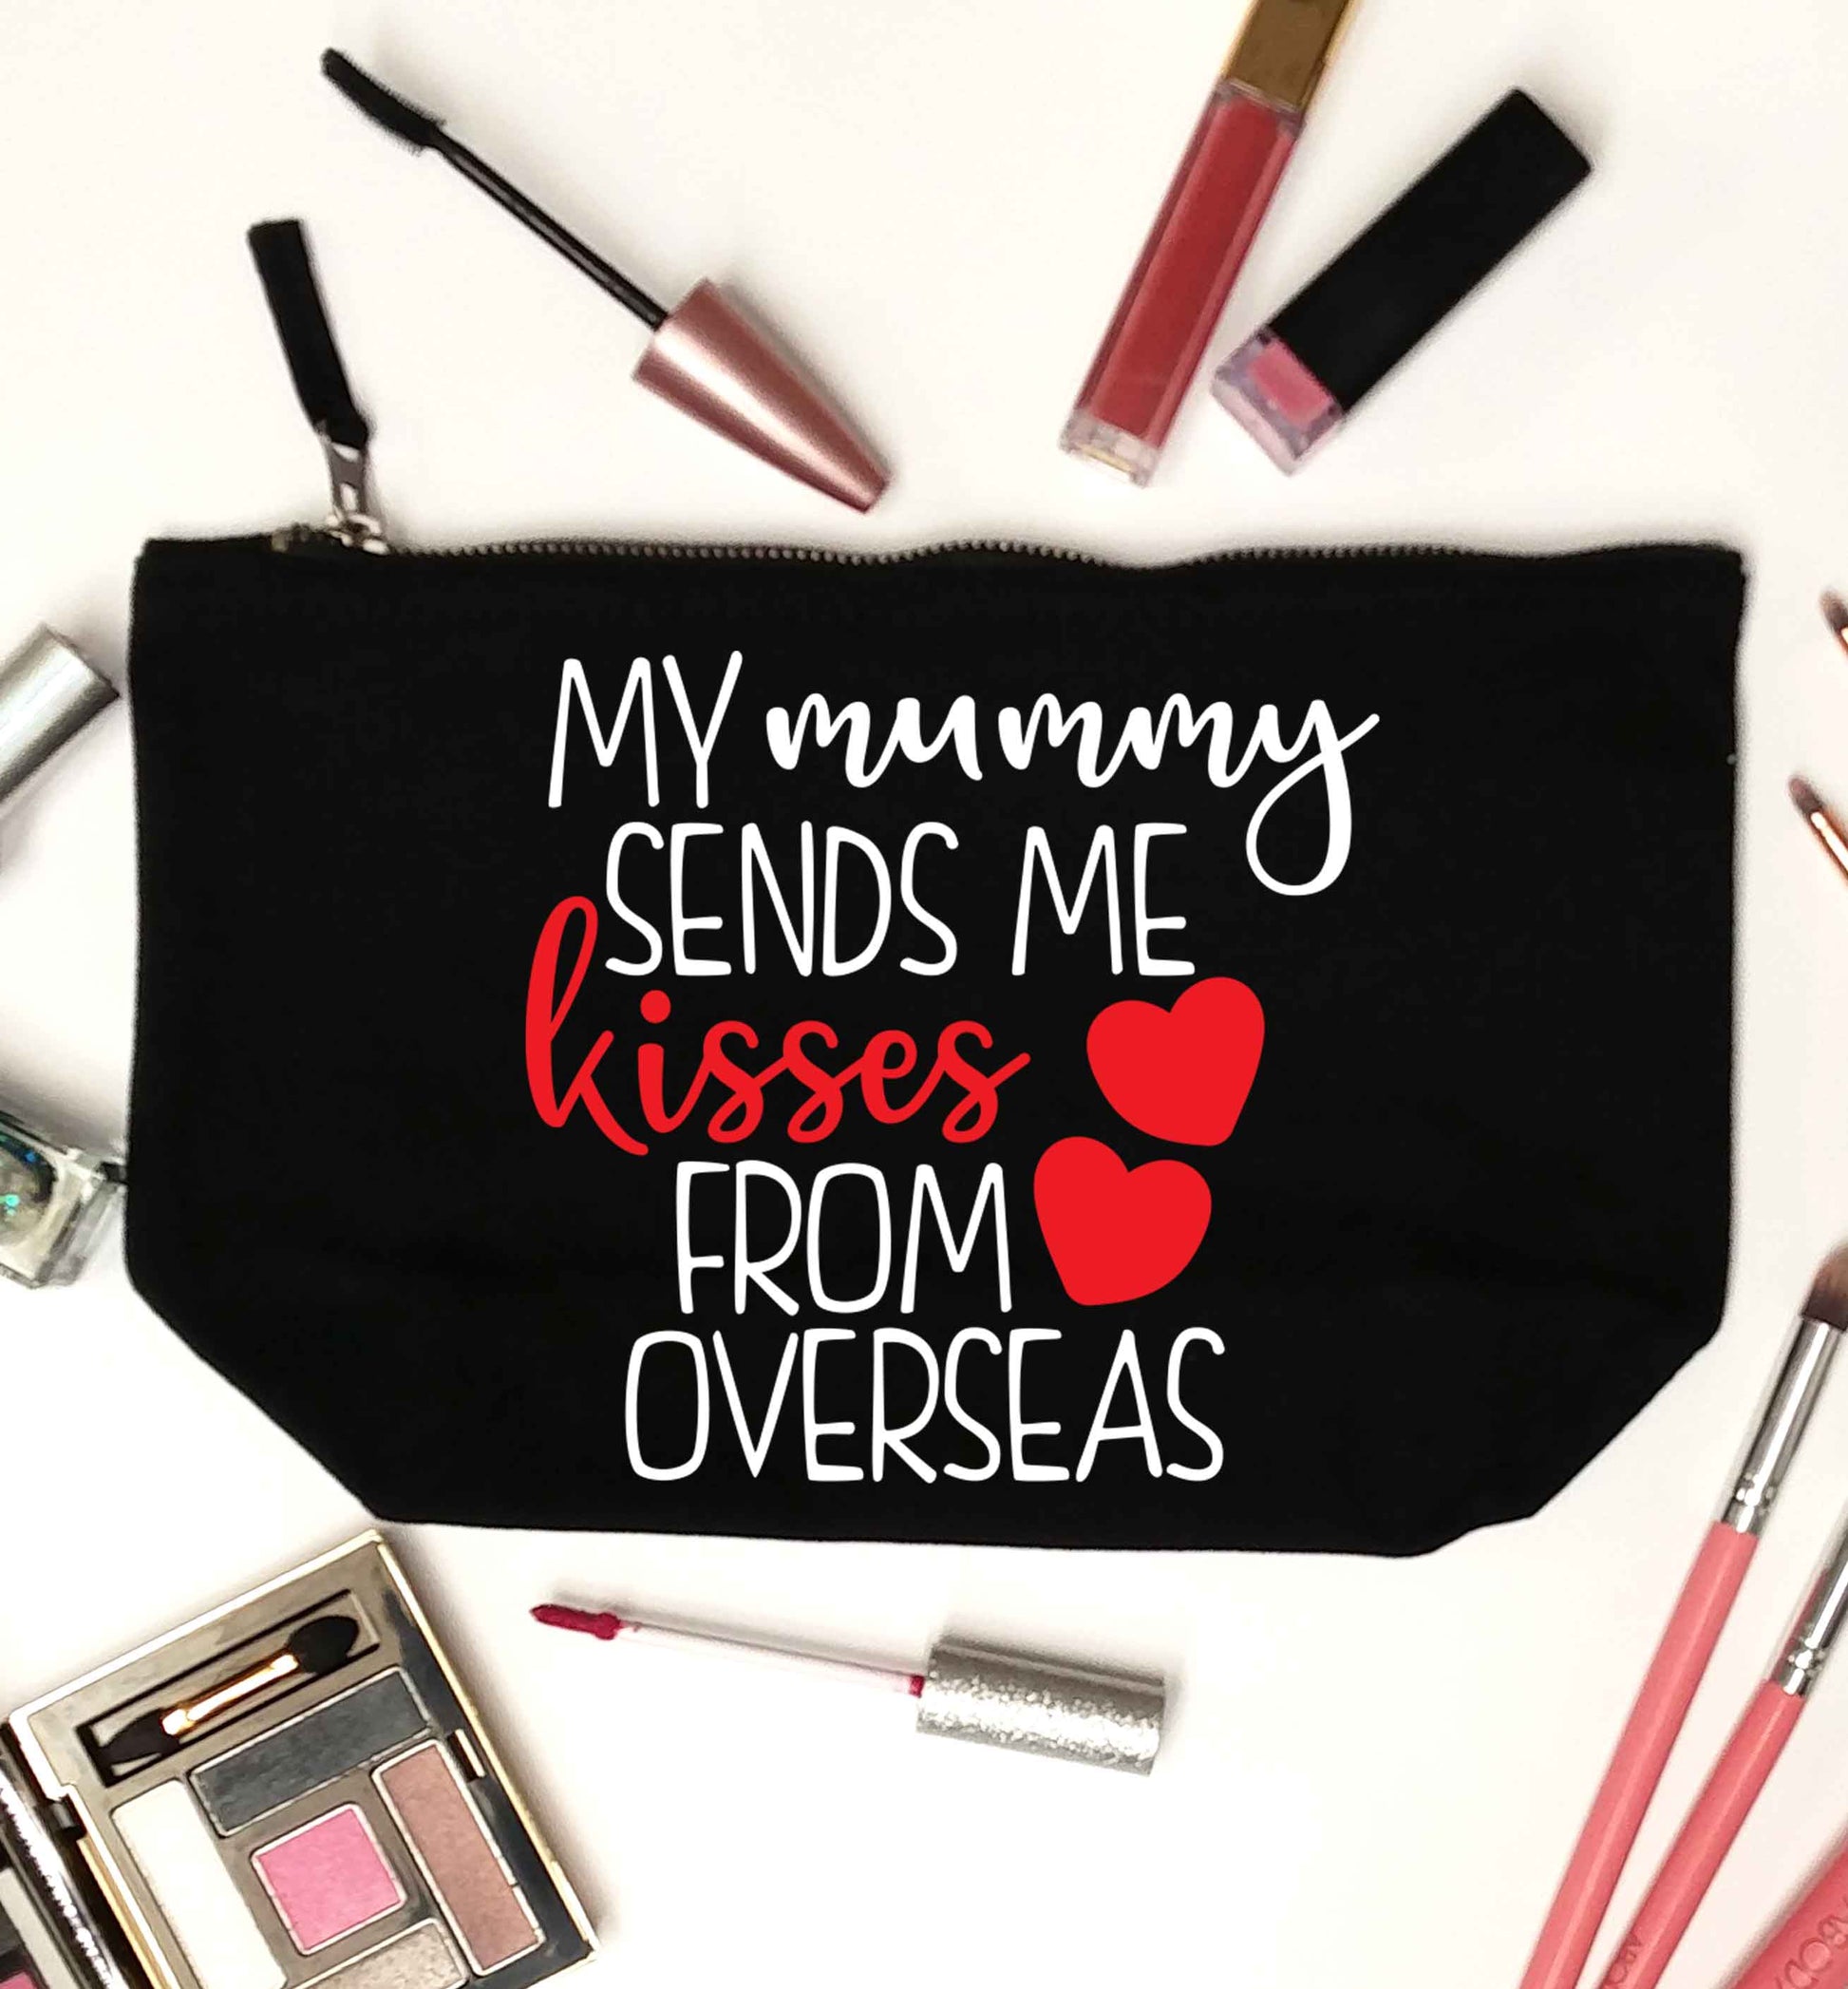 My mummy sends me kisses from overseas black makeup bag